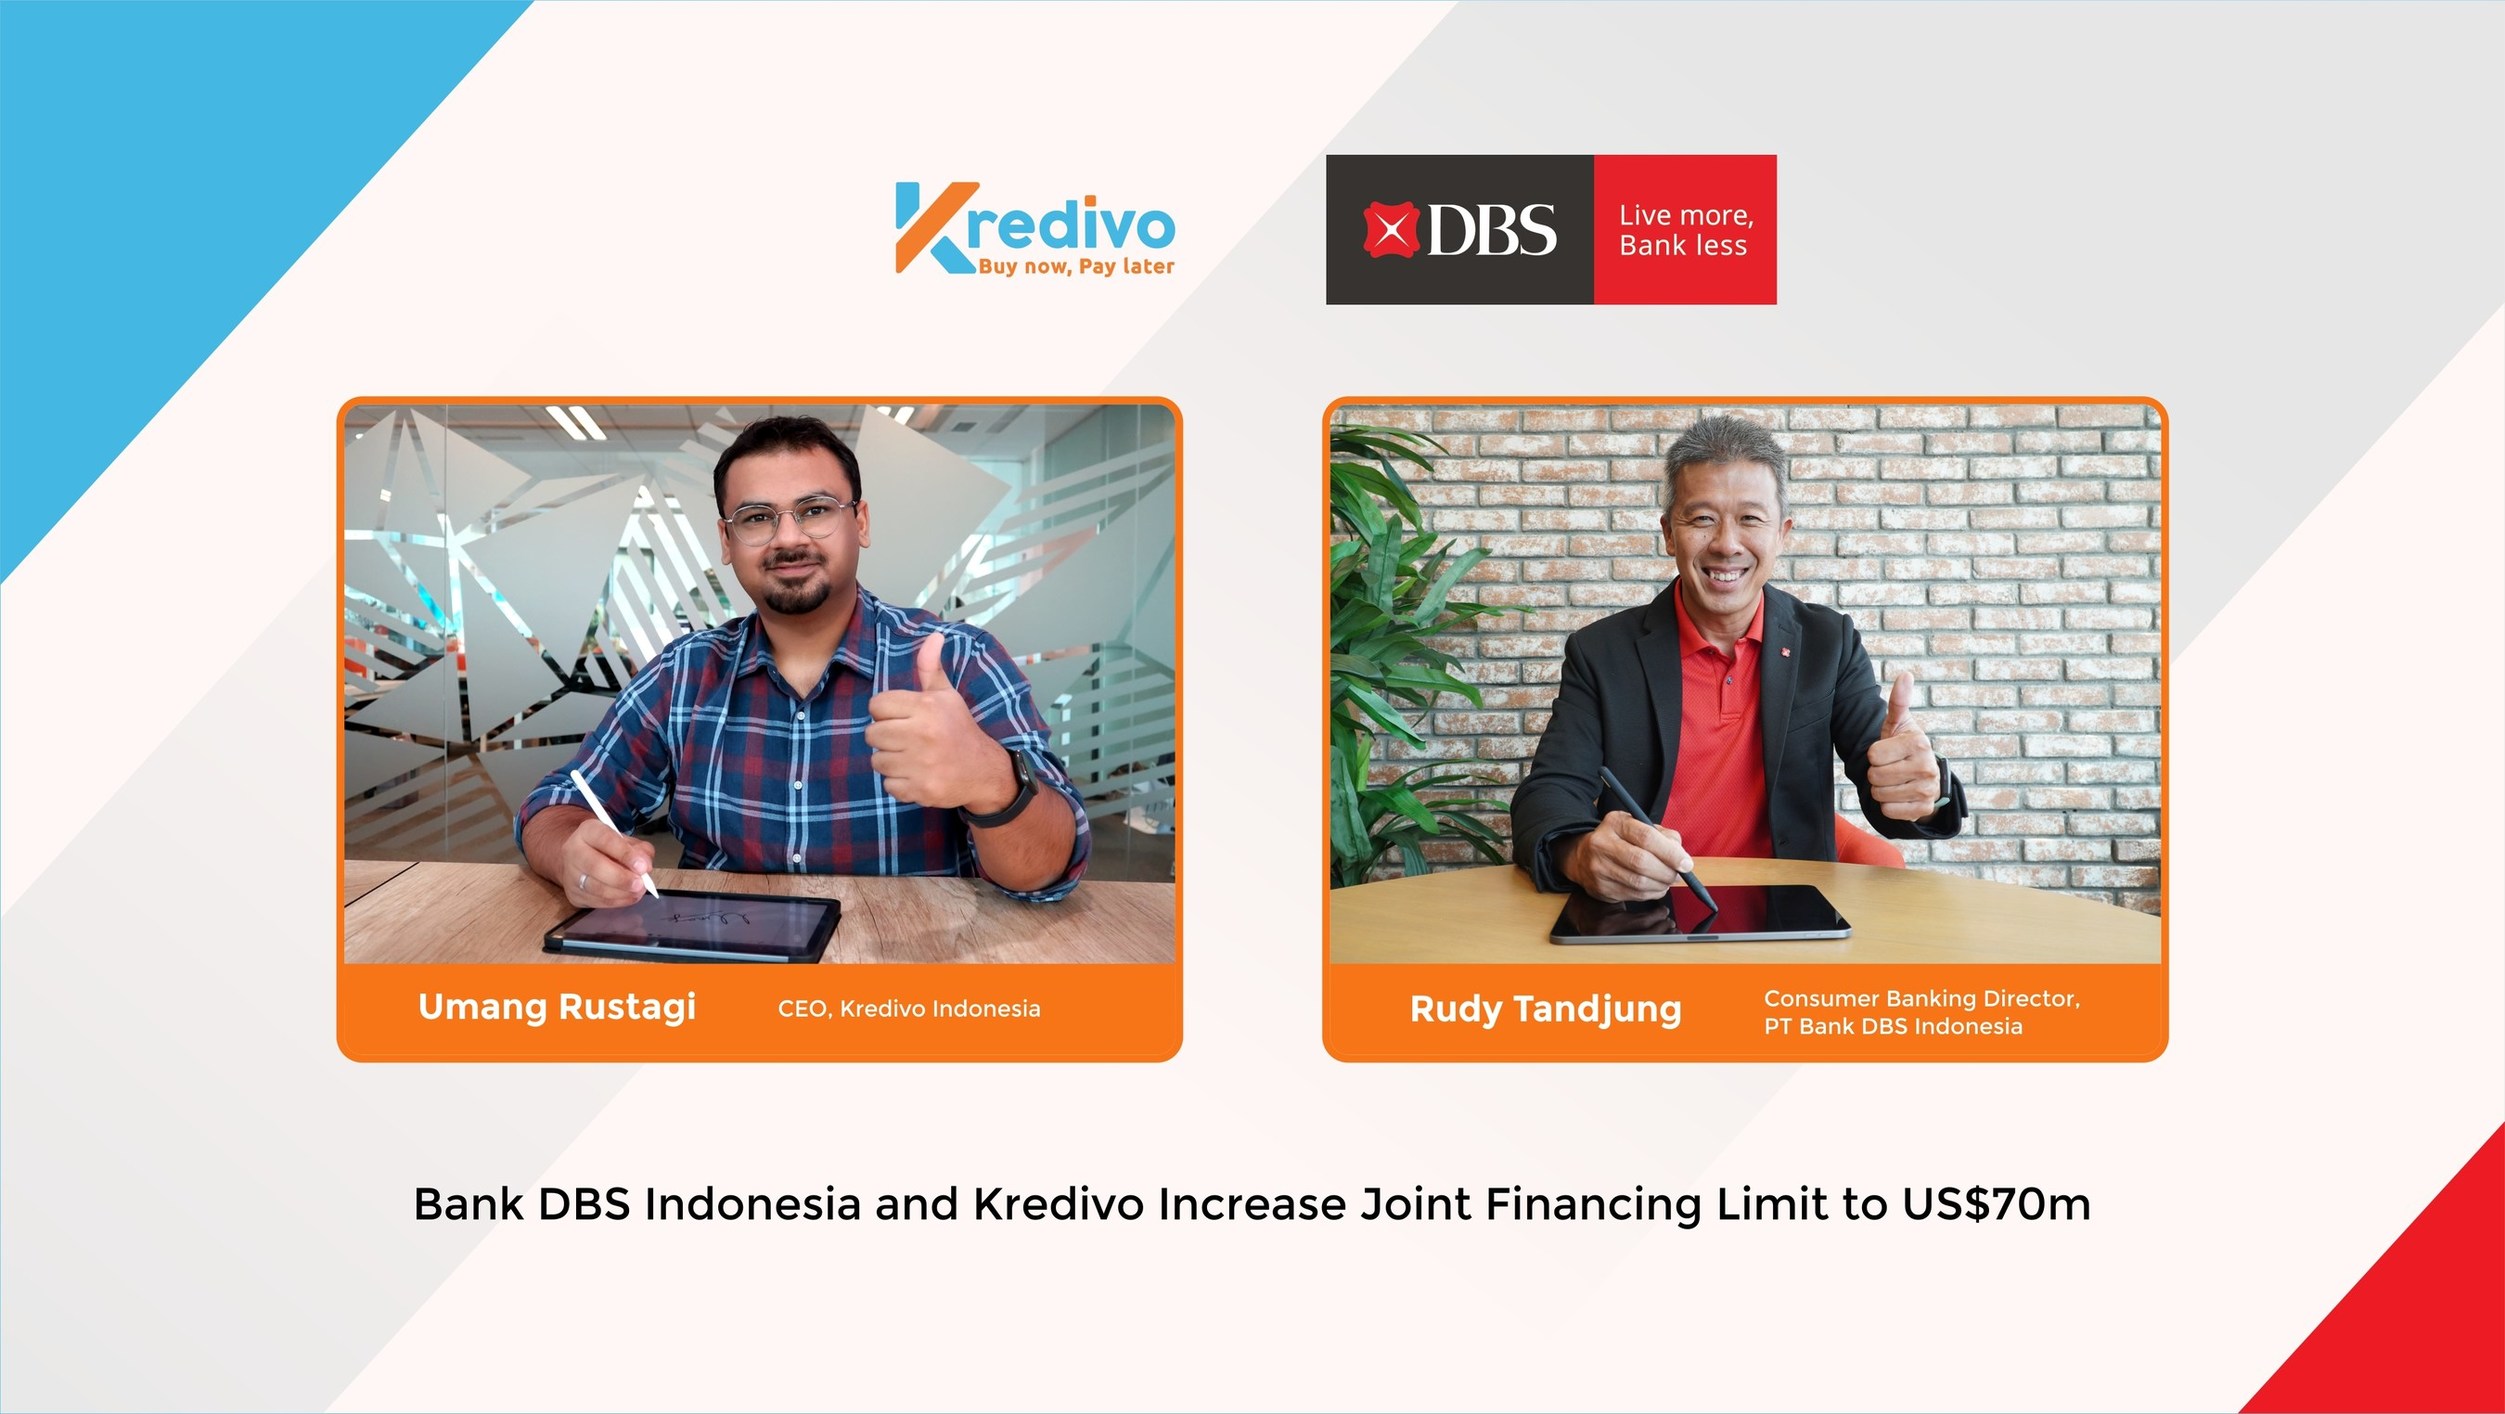 Bank DBS Indonesia and Kredivo Increase Joint Financing Limit to US$70m